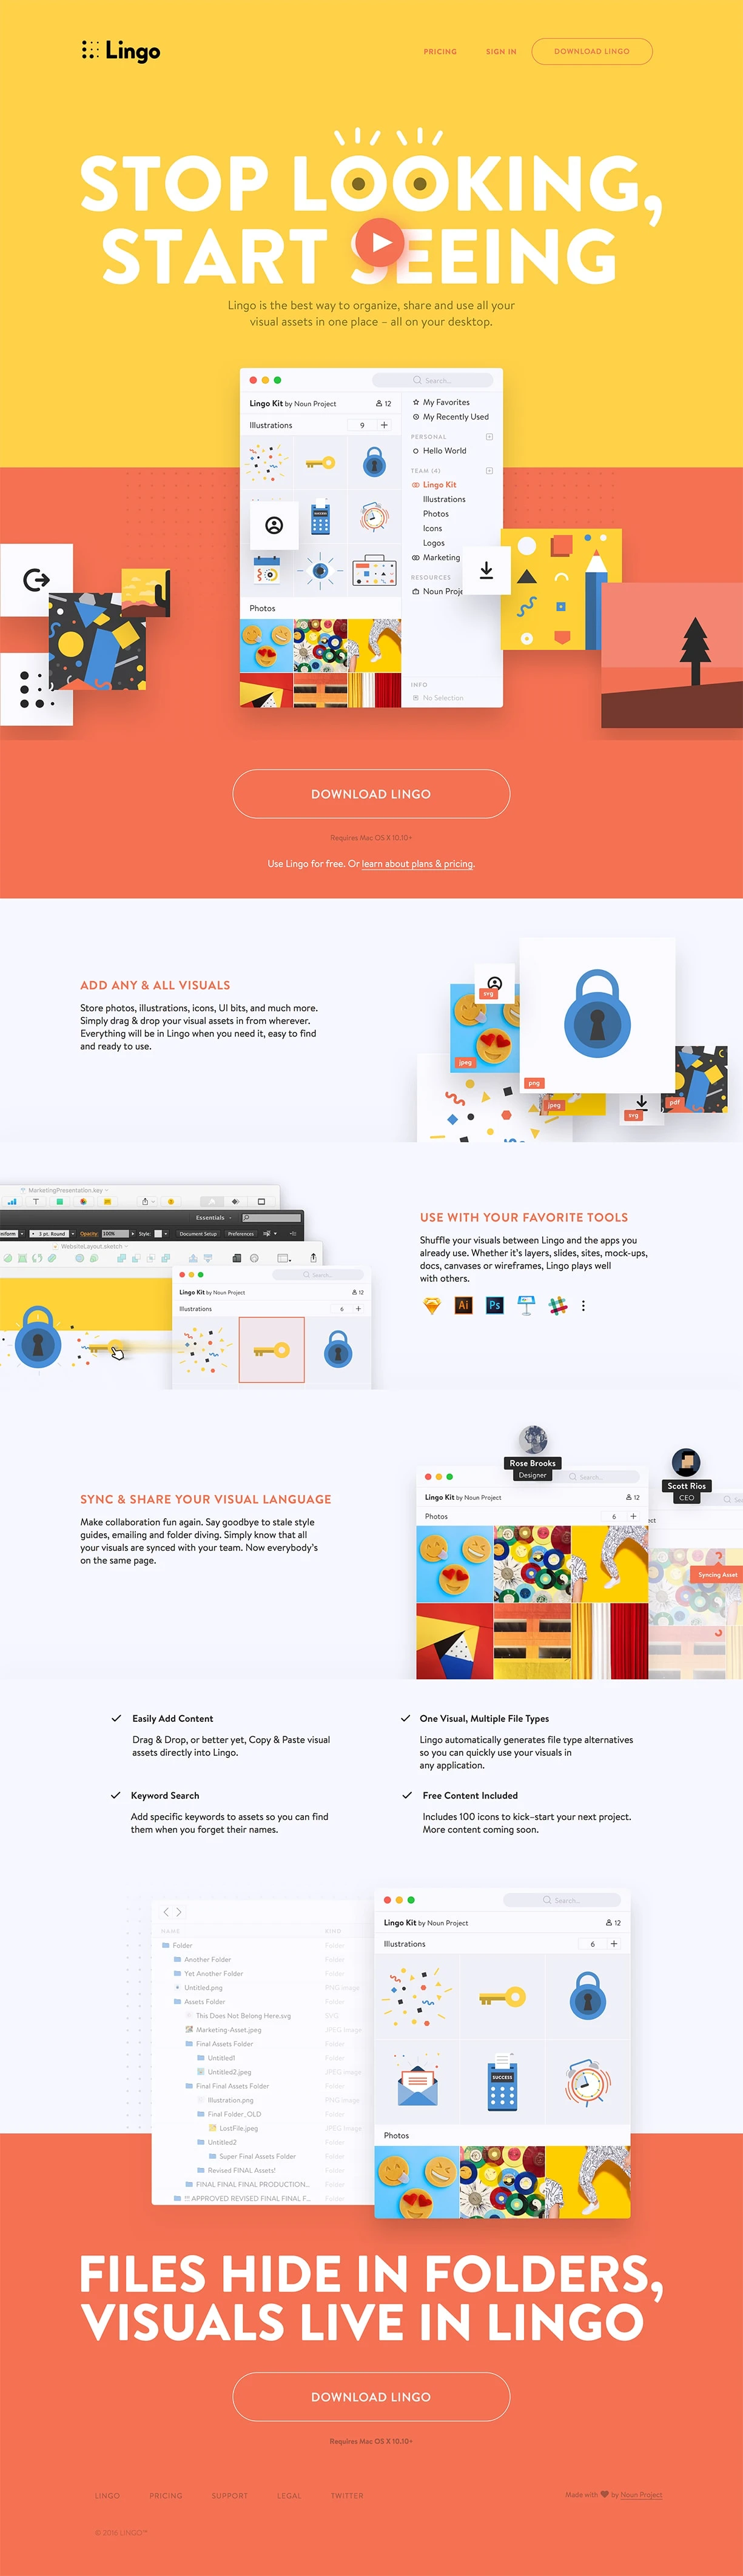 Lingo Landing Page Example: Lingo is the best way to organize, share and use all your visual assets in one place - all on your desktop.